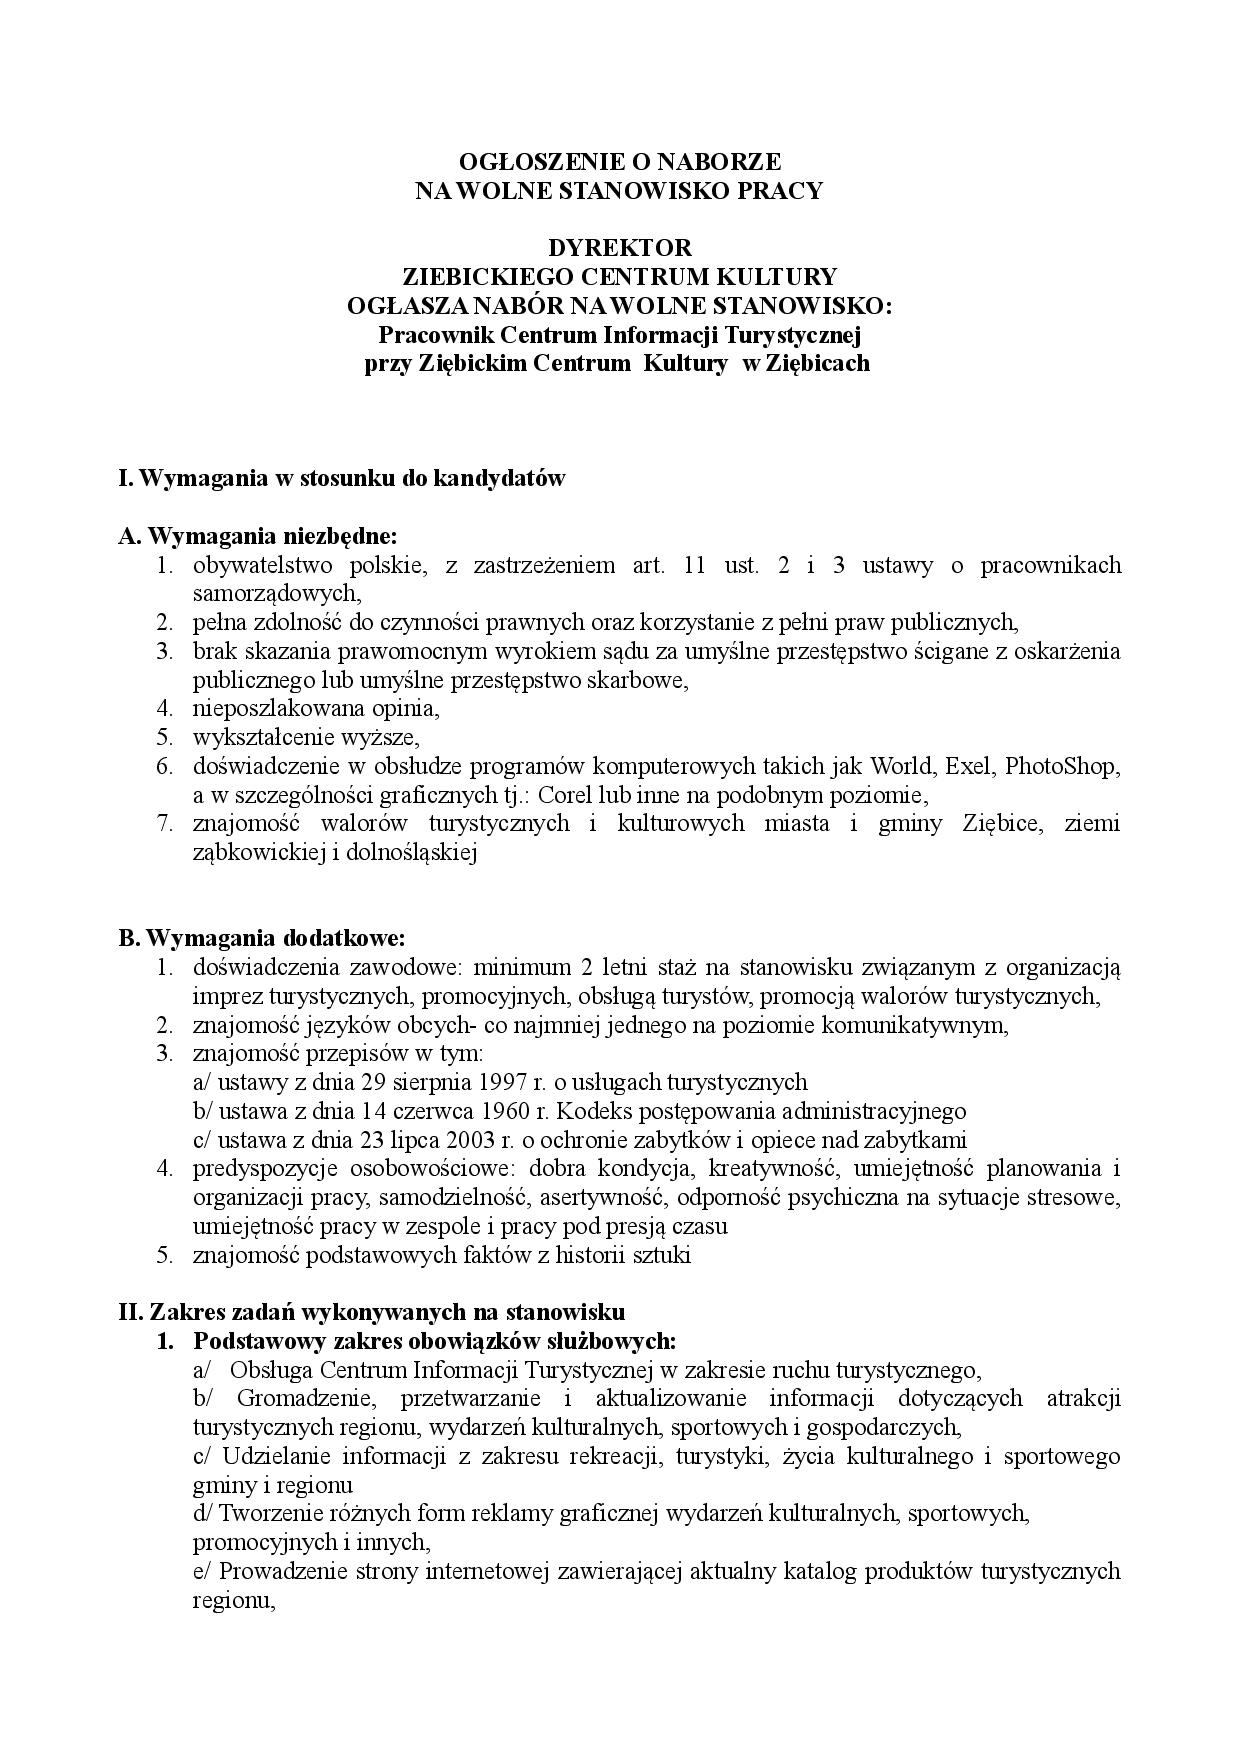 ---- Document-page-001.jpg